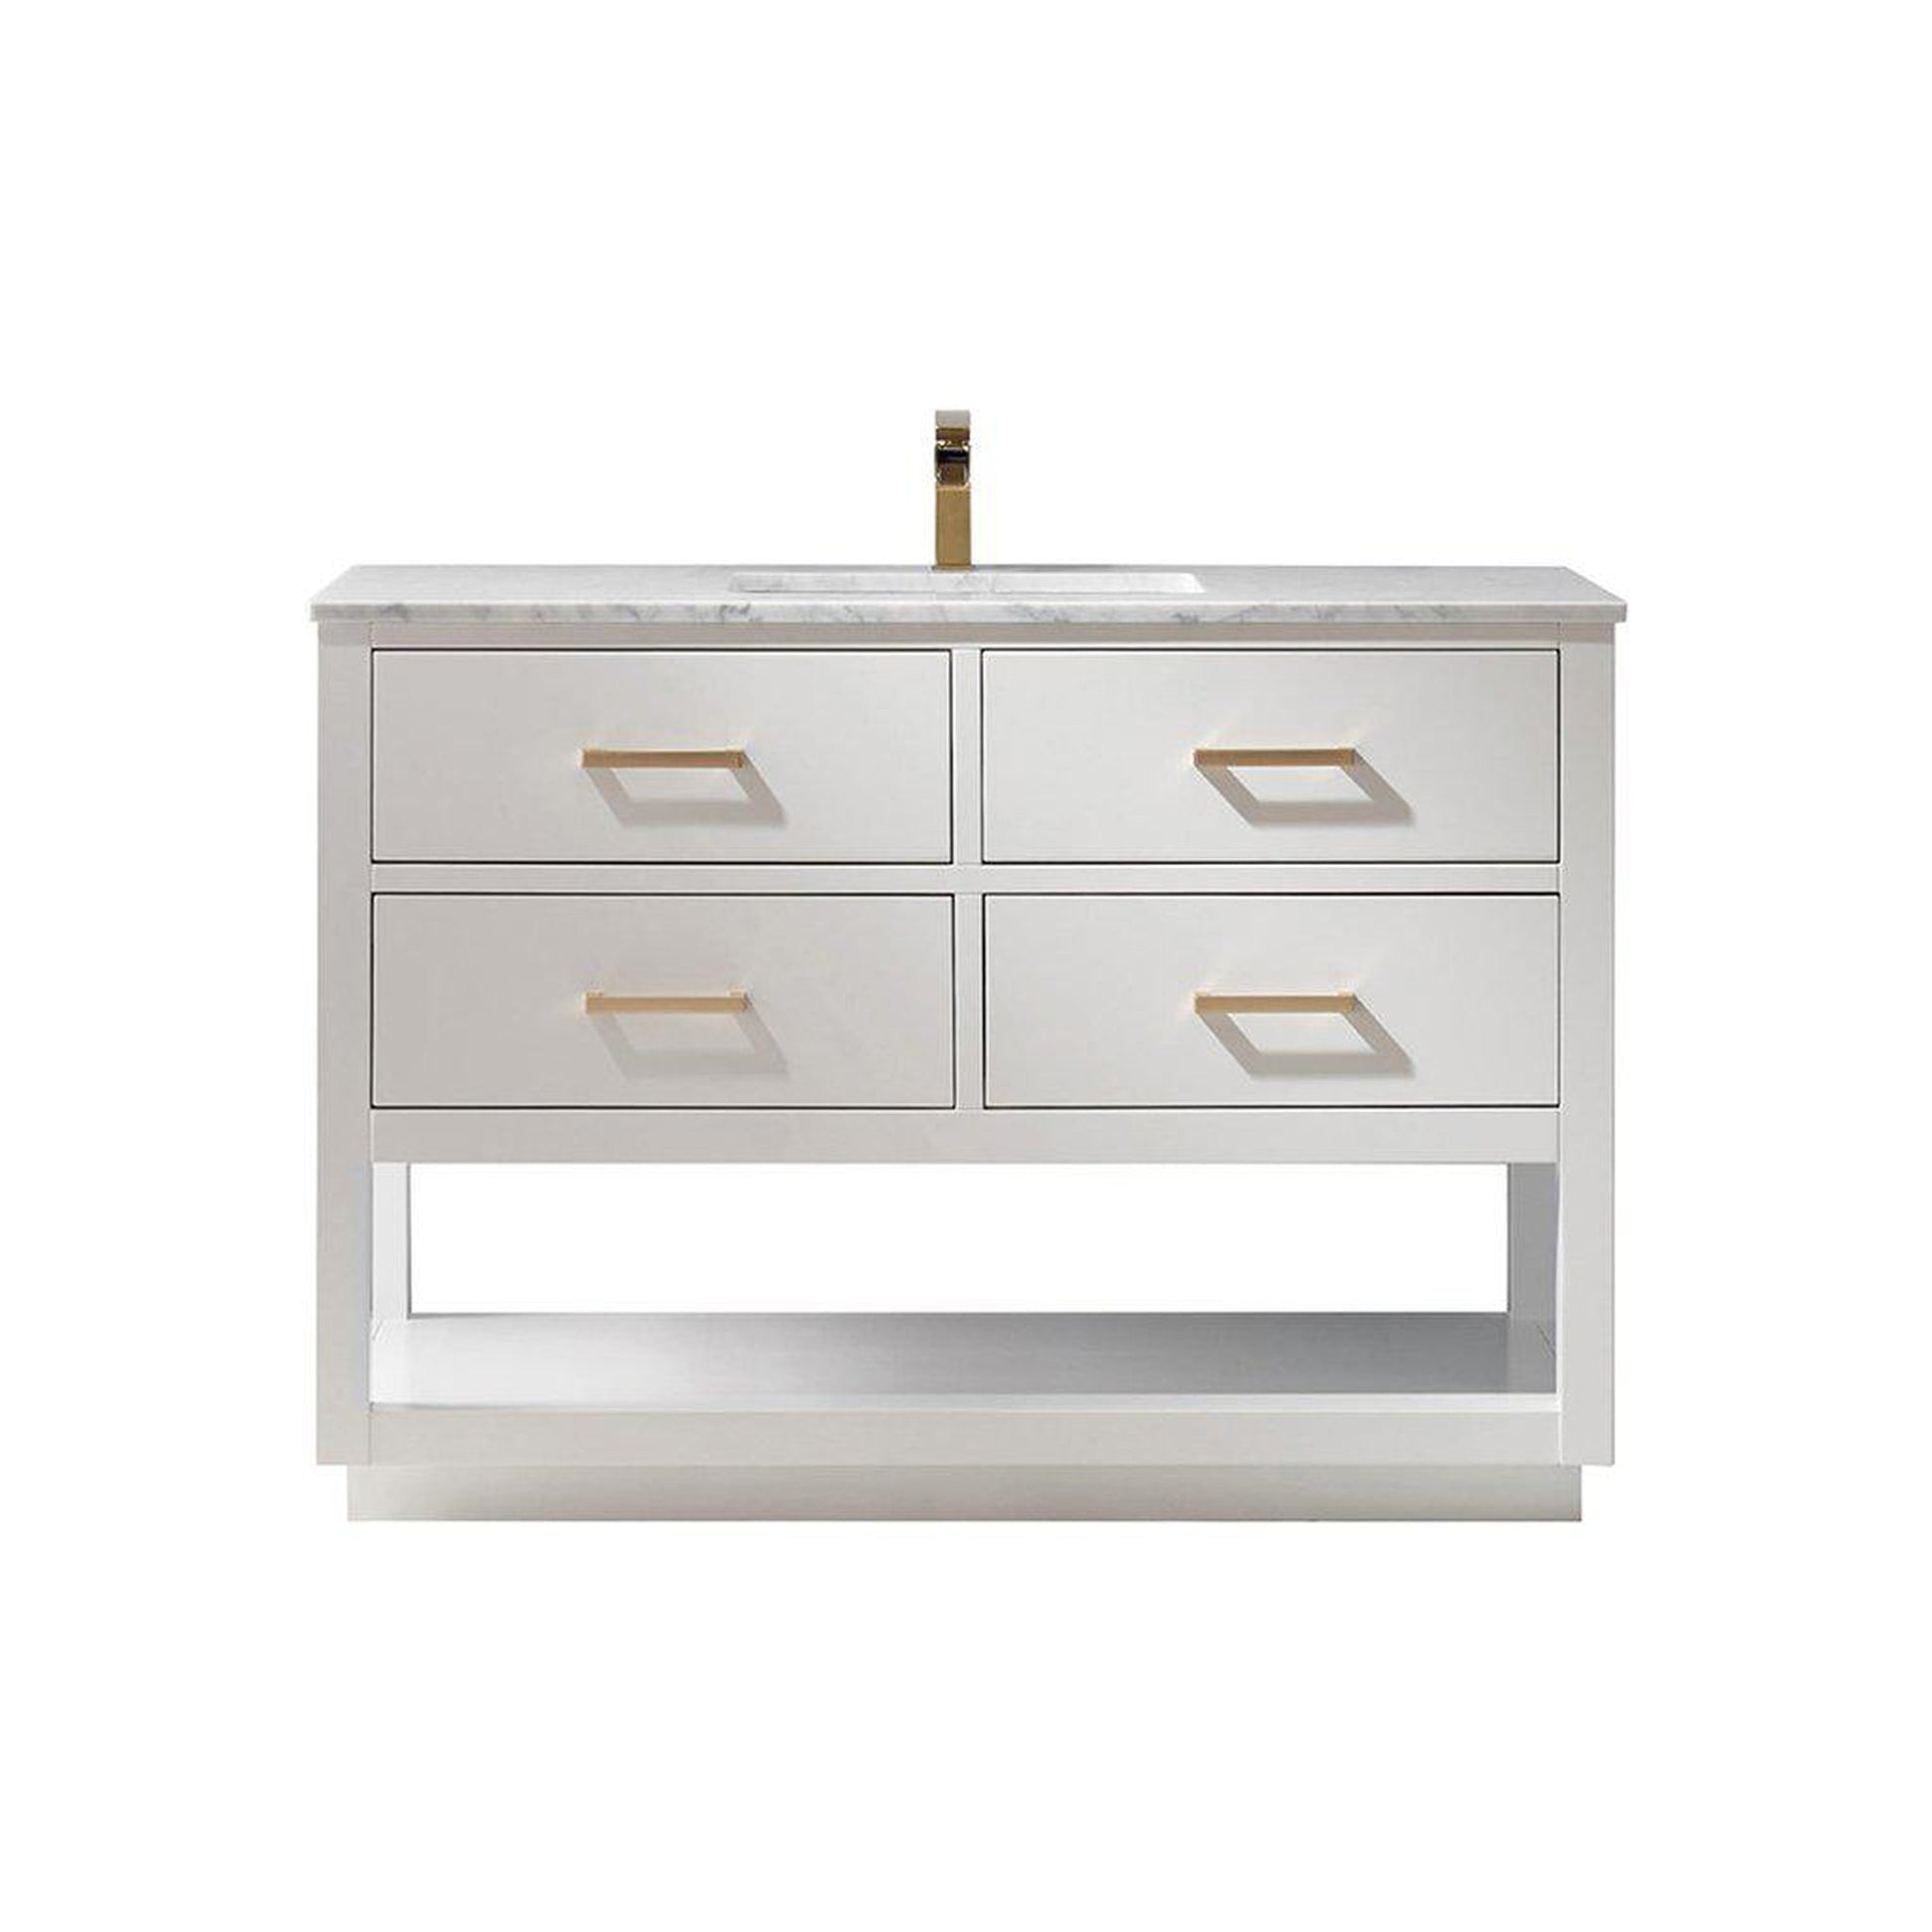 Altair Remi 48" Single White Freestanding Bathroom Vanity Set With Natural Carrara White Marble Top, Rectangular Undermount Ceramic Sink, and Overflow